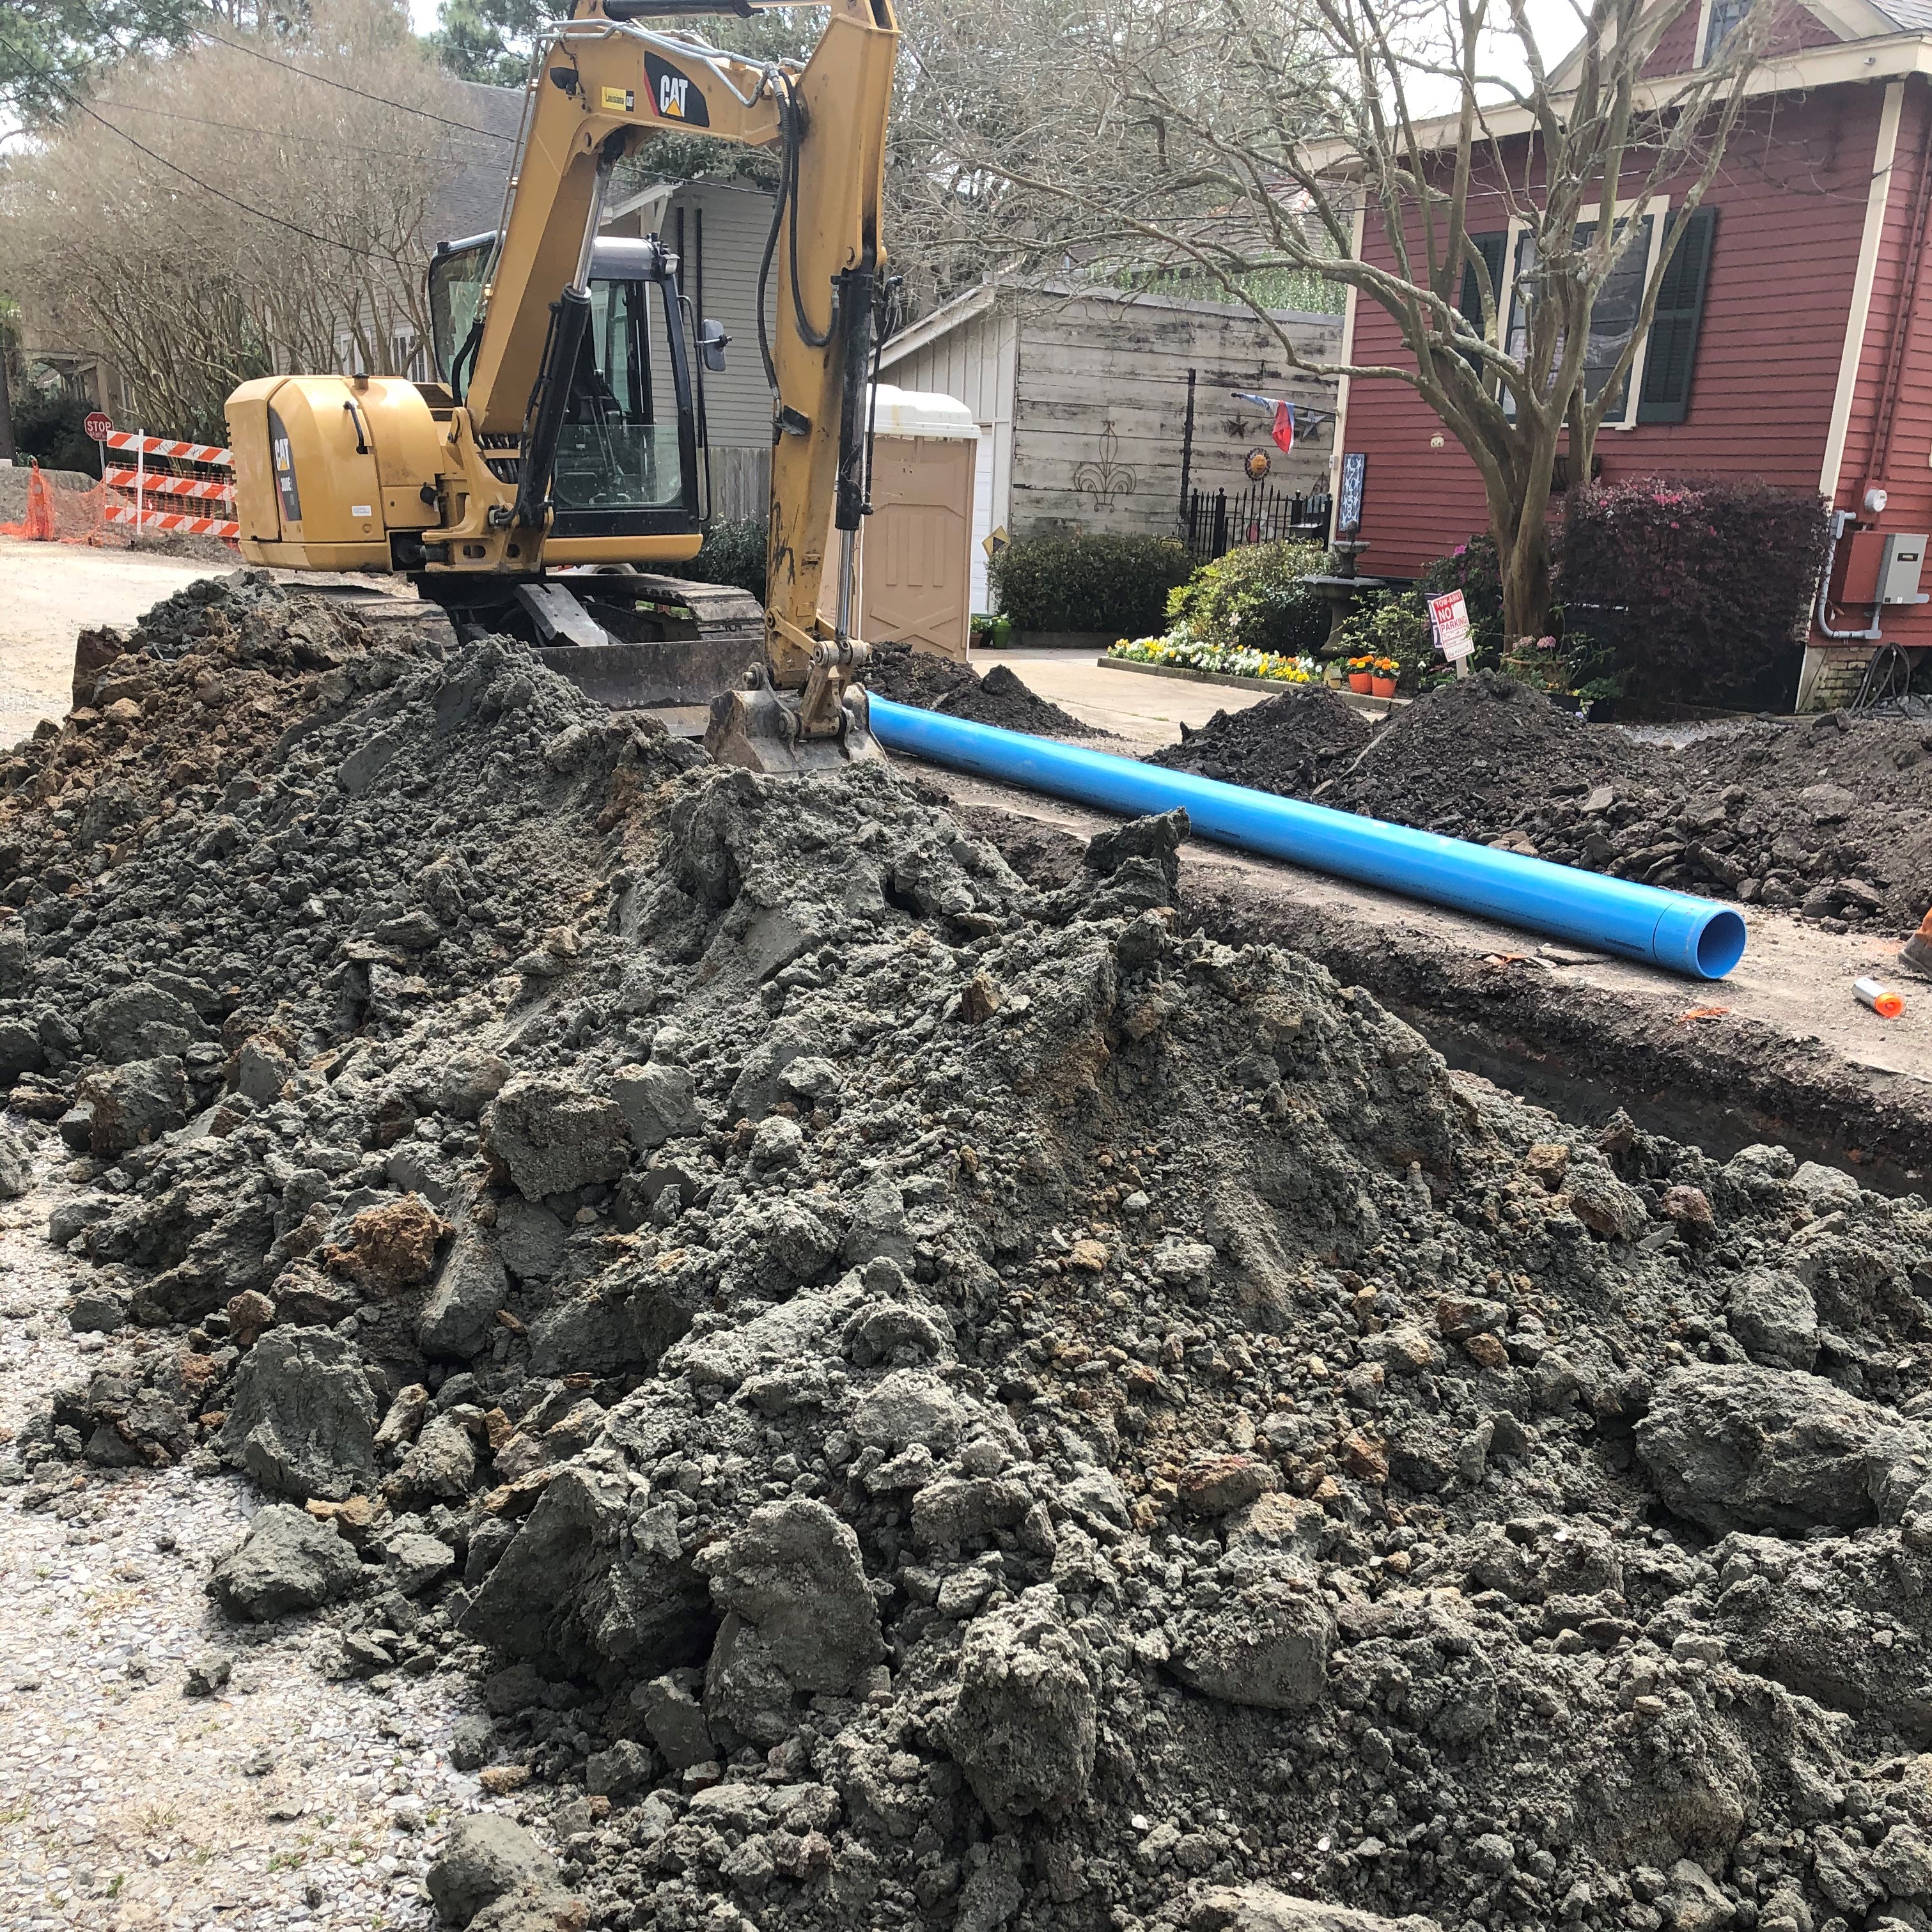 BLACK PEARL GROUP B CONTINUES MOVING FORWARD WITH SEWER LINE REPLACEMENTS